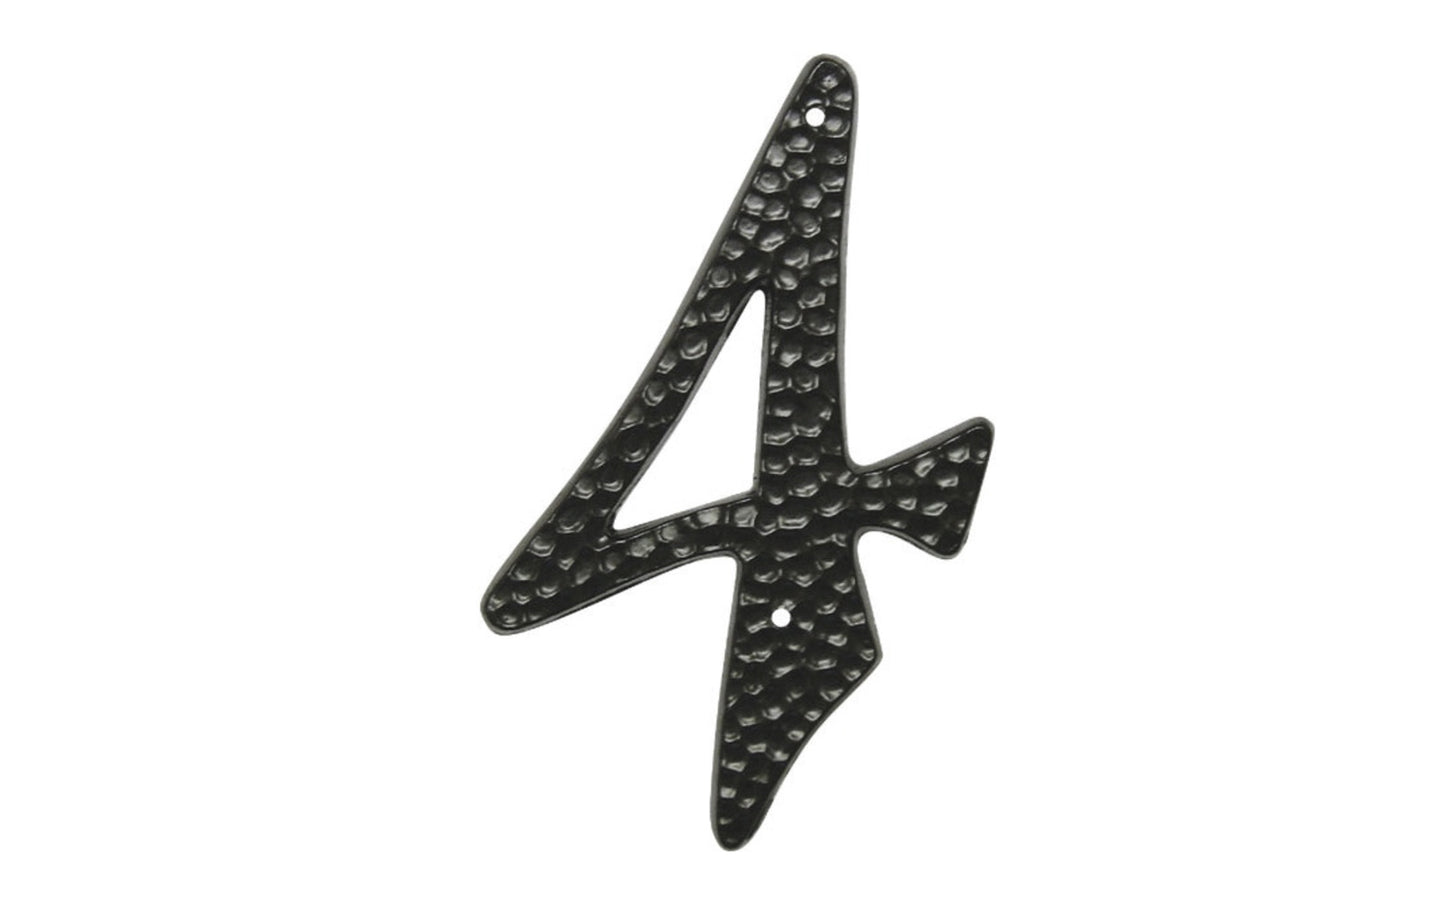 Number Four Black Hammered House Number in a 3-1/2" Size. Made of die-cast aluminum material with a black hammered style. Mounting nails included. #4 House Number. Hy-Ko Model No. DC-3/4. 029069201043